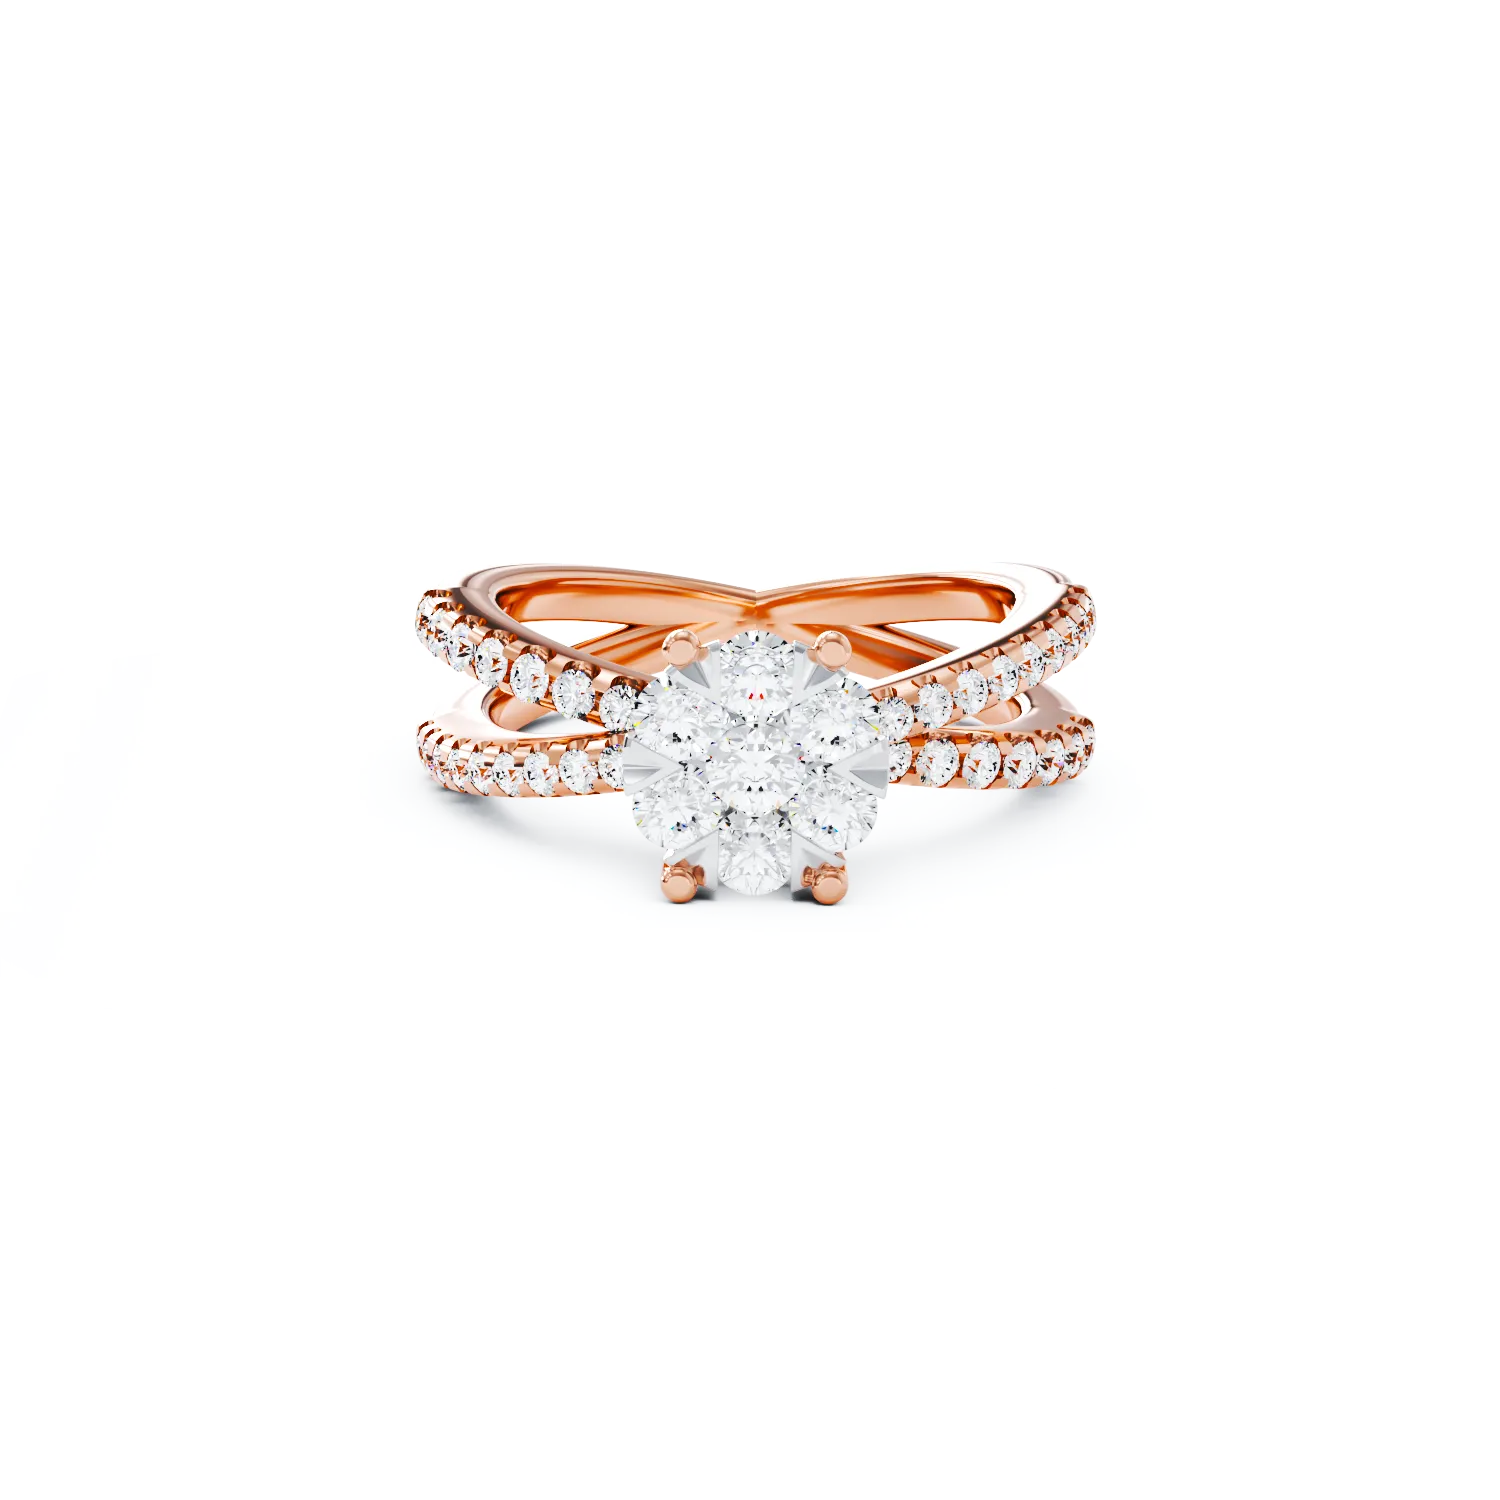 18k rose gold engagement ring with a 0.6ct diamond